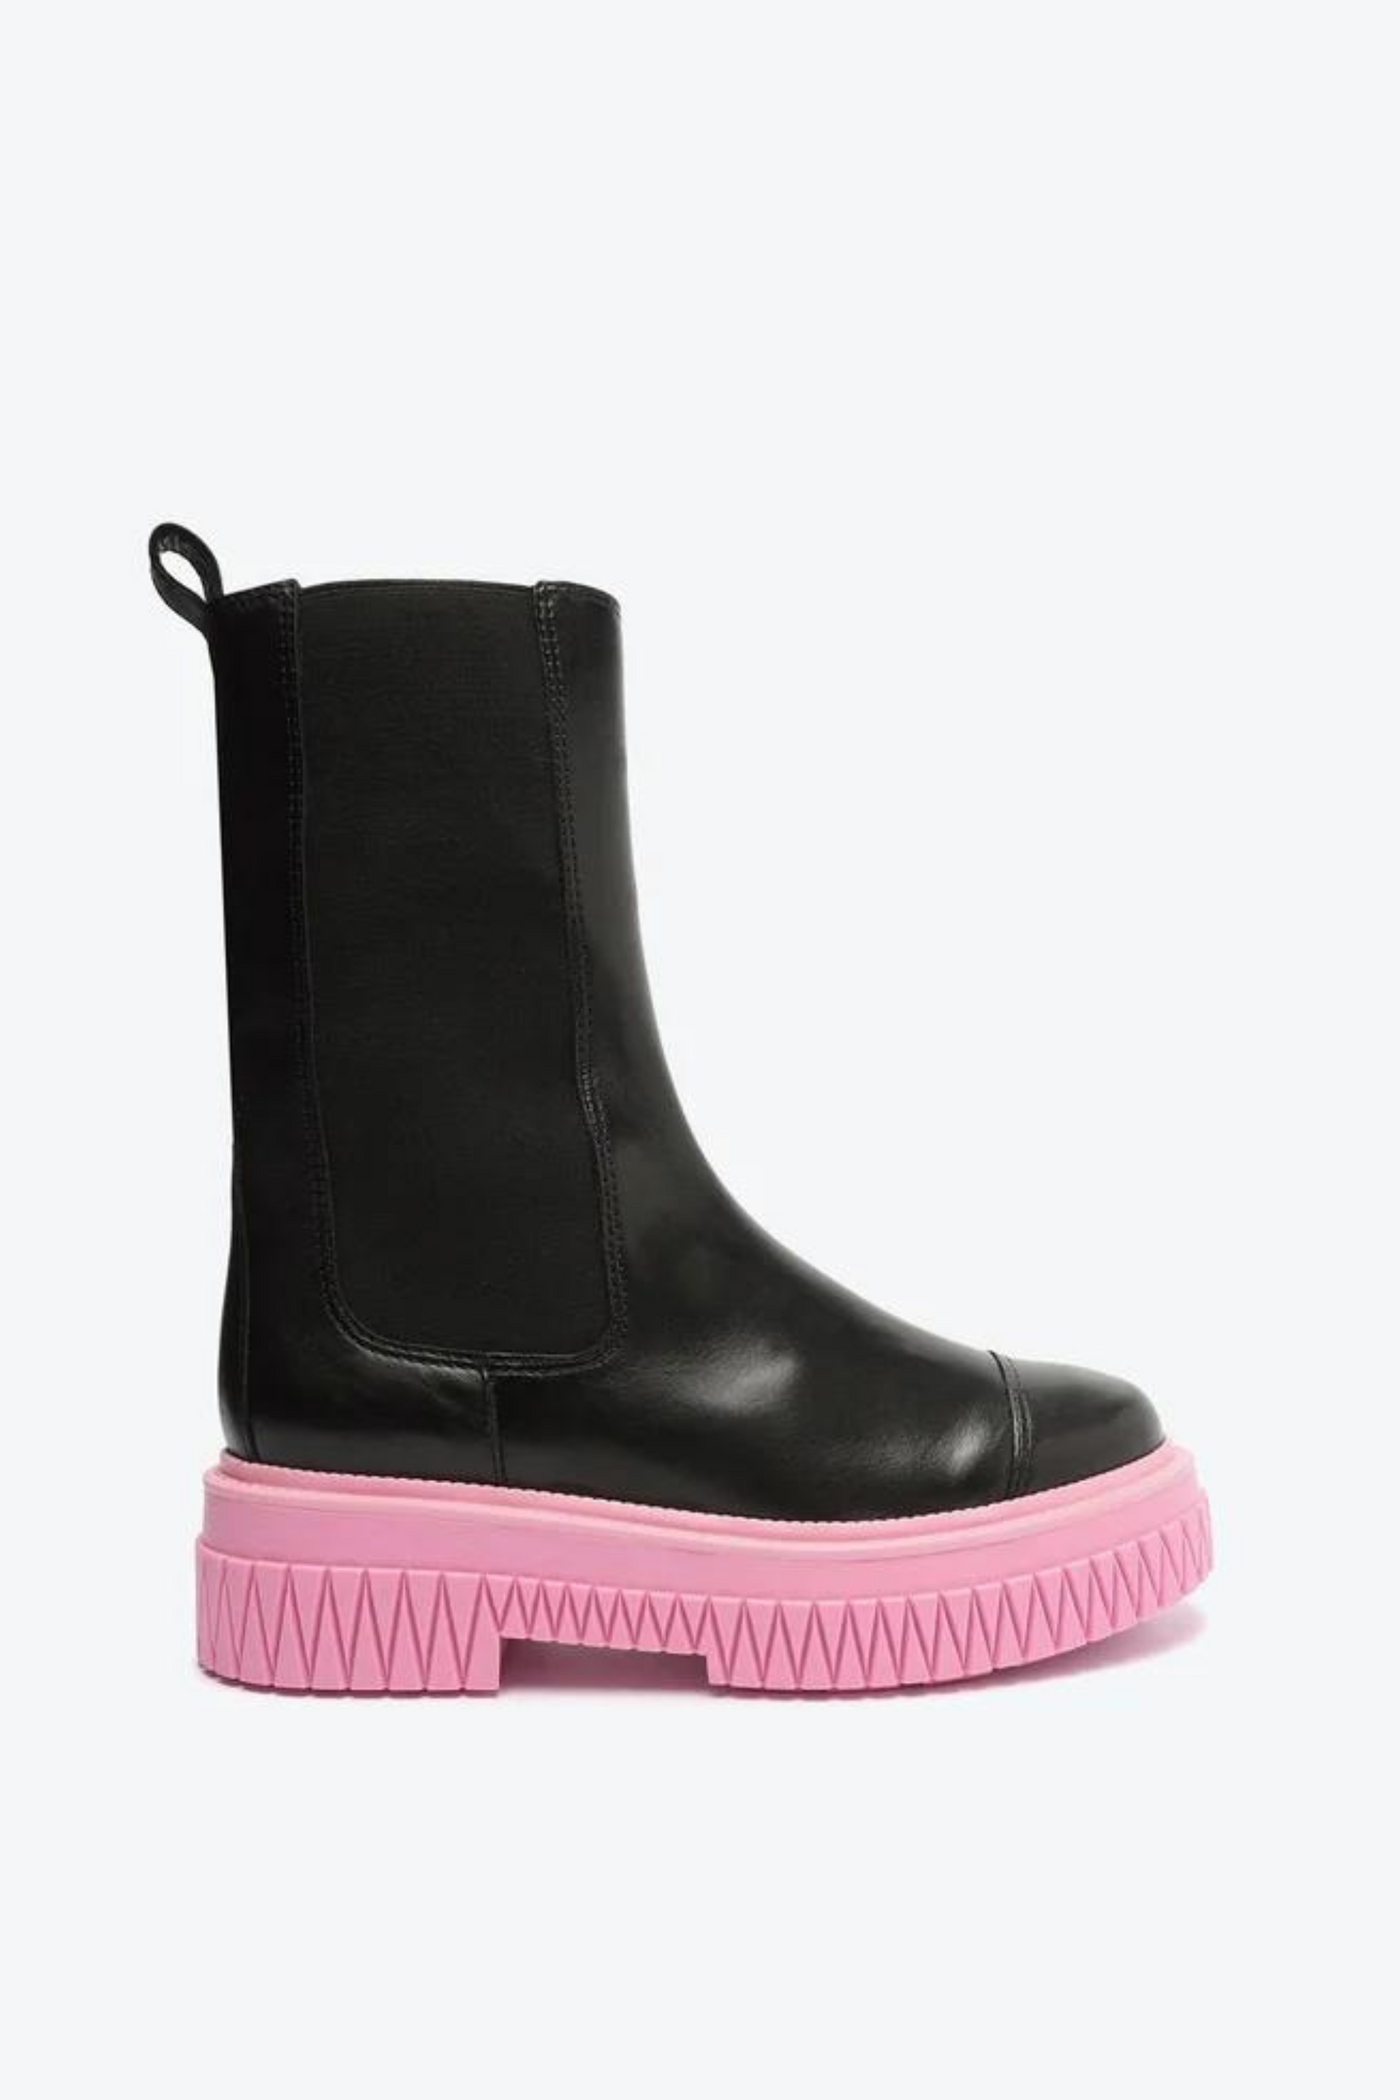 BLACK AND PINK CHELSEA BOOTS